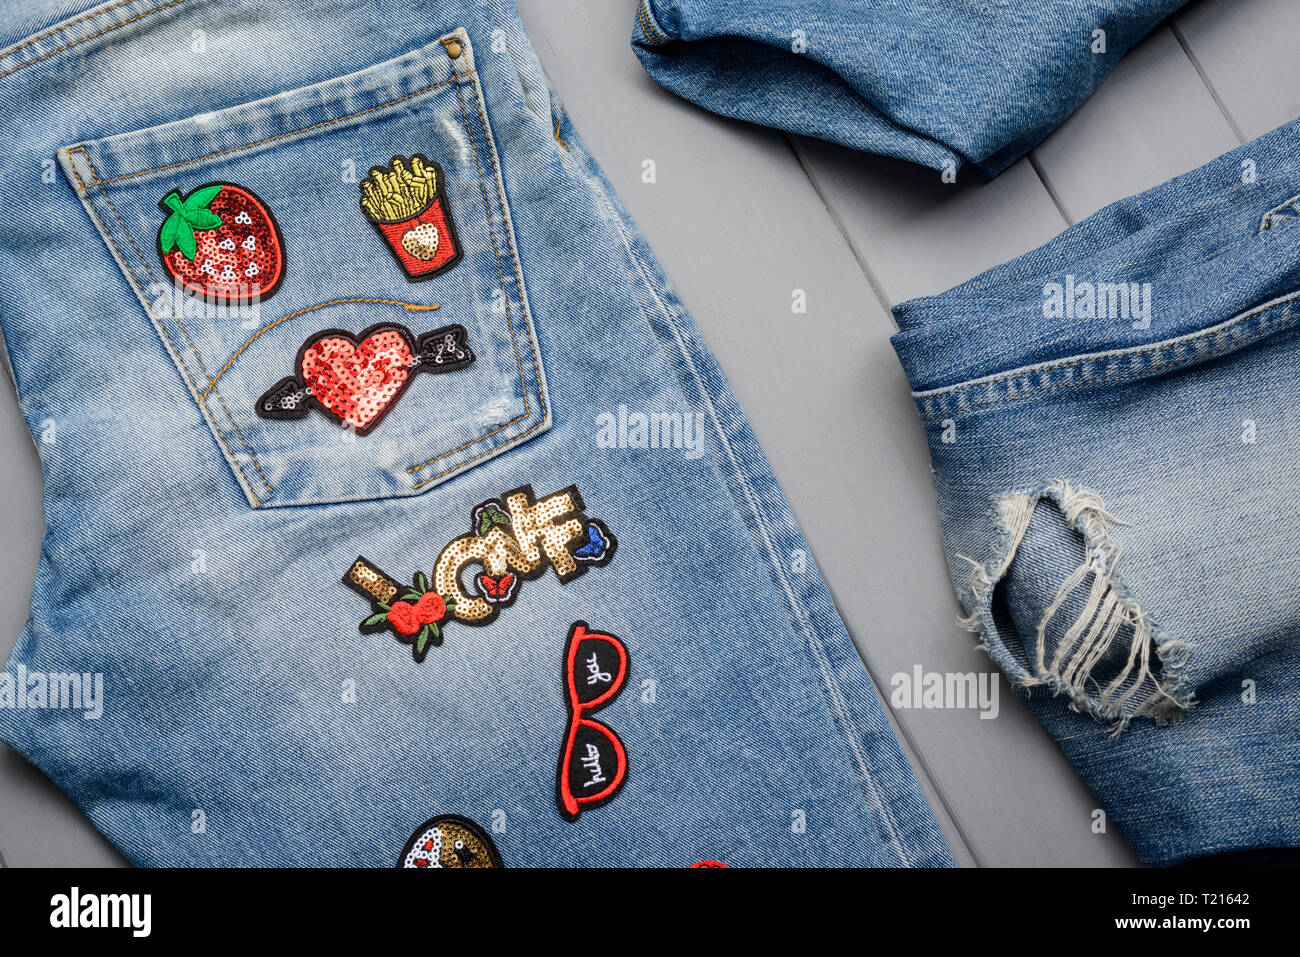 Sewing beautiful patches to jeans Stock Photo